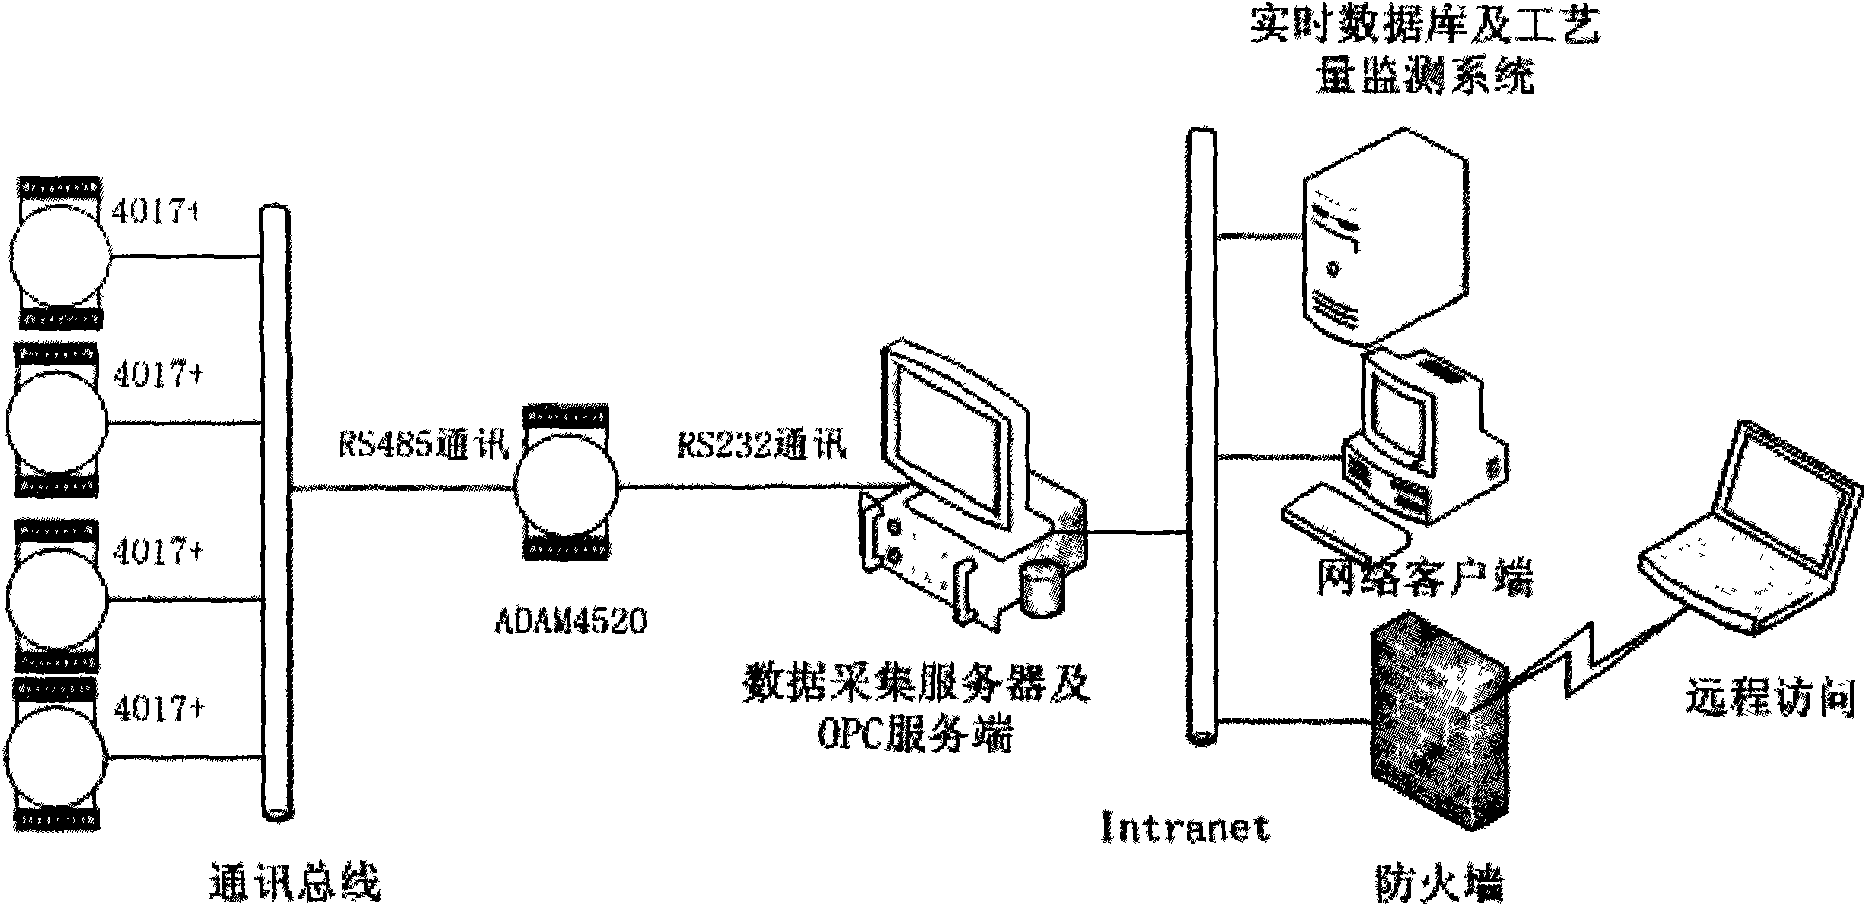 Equipment operating and process quality state monitoring system for high-speed rolling mill